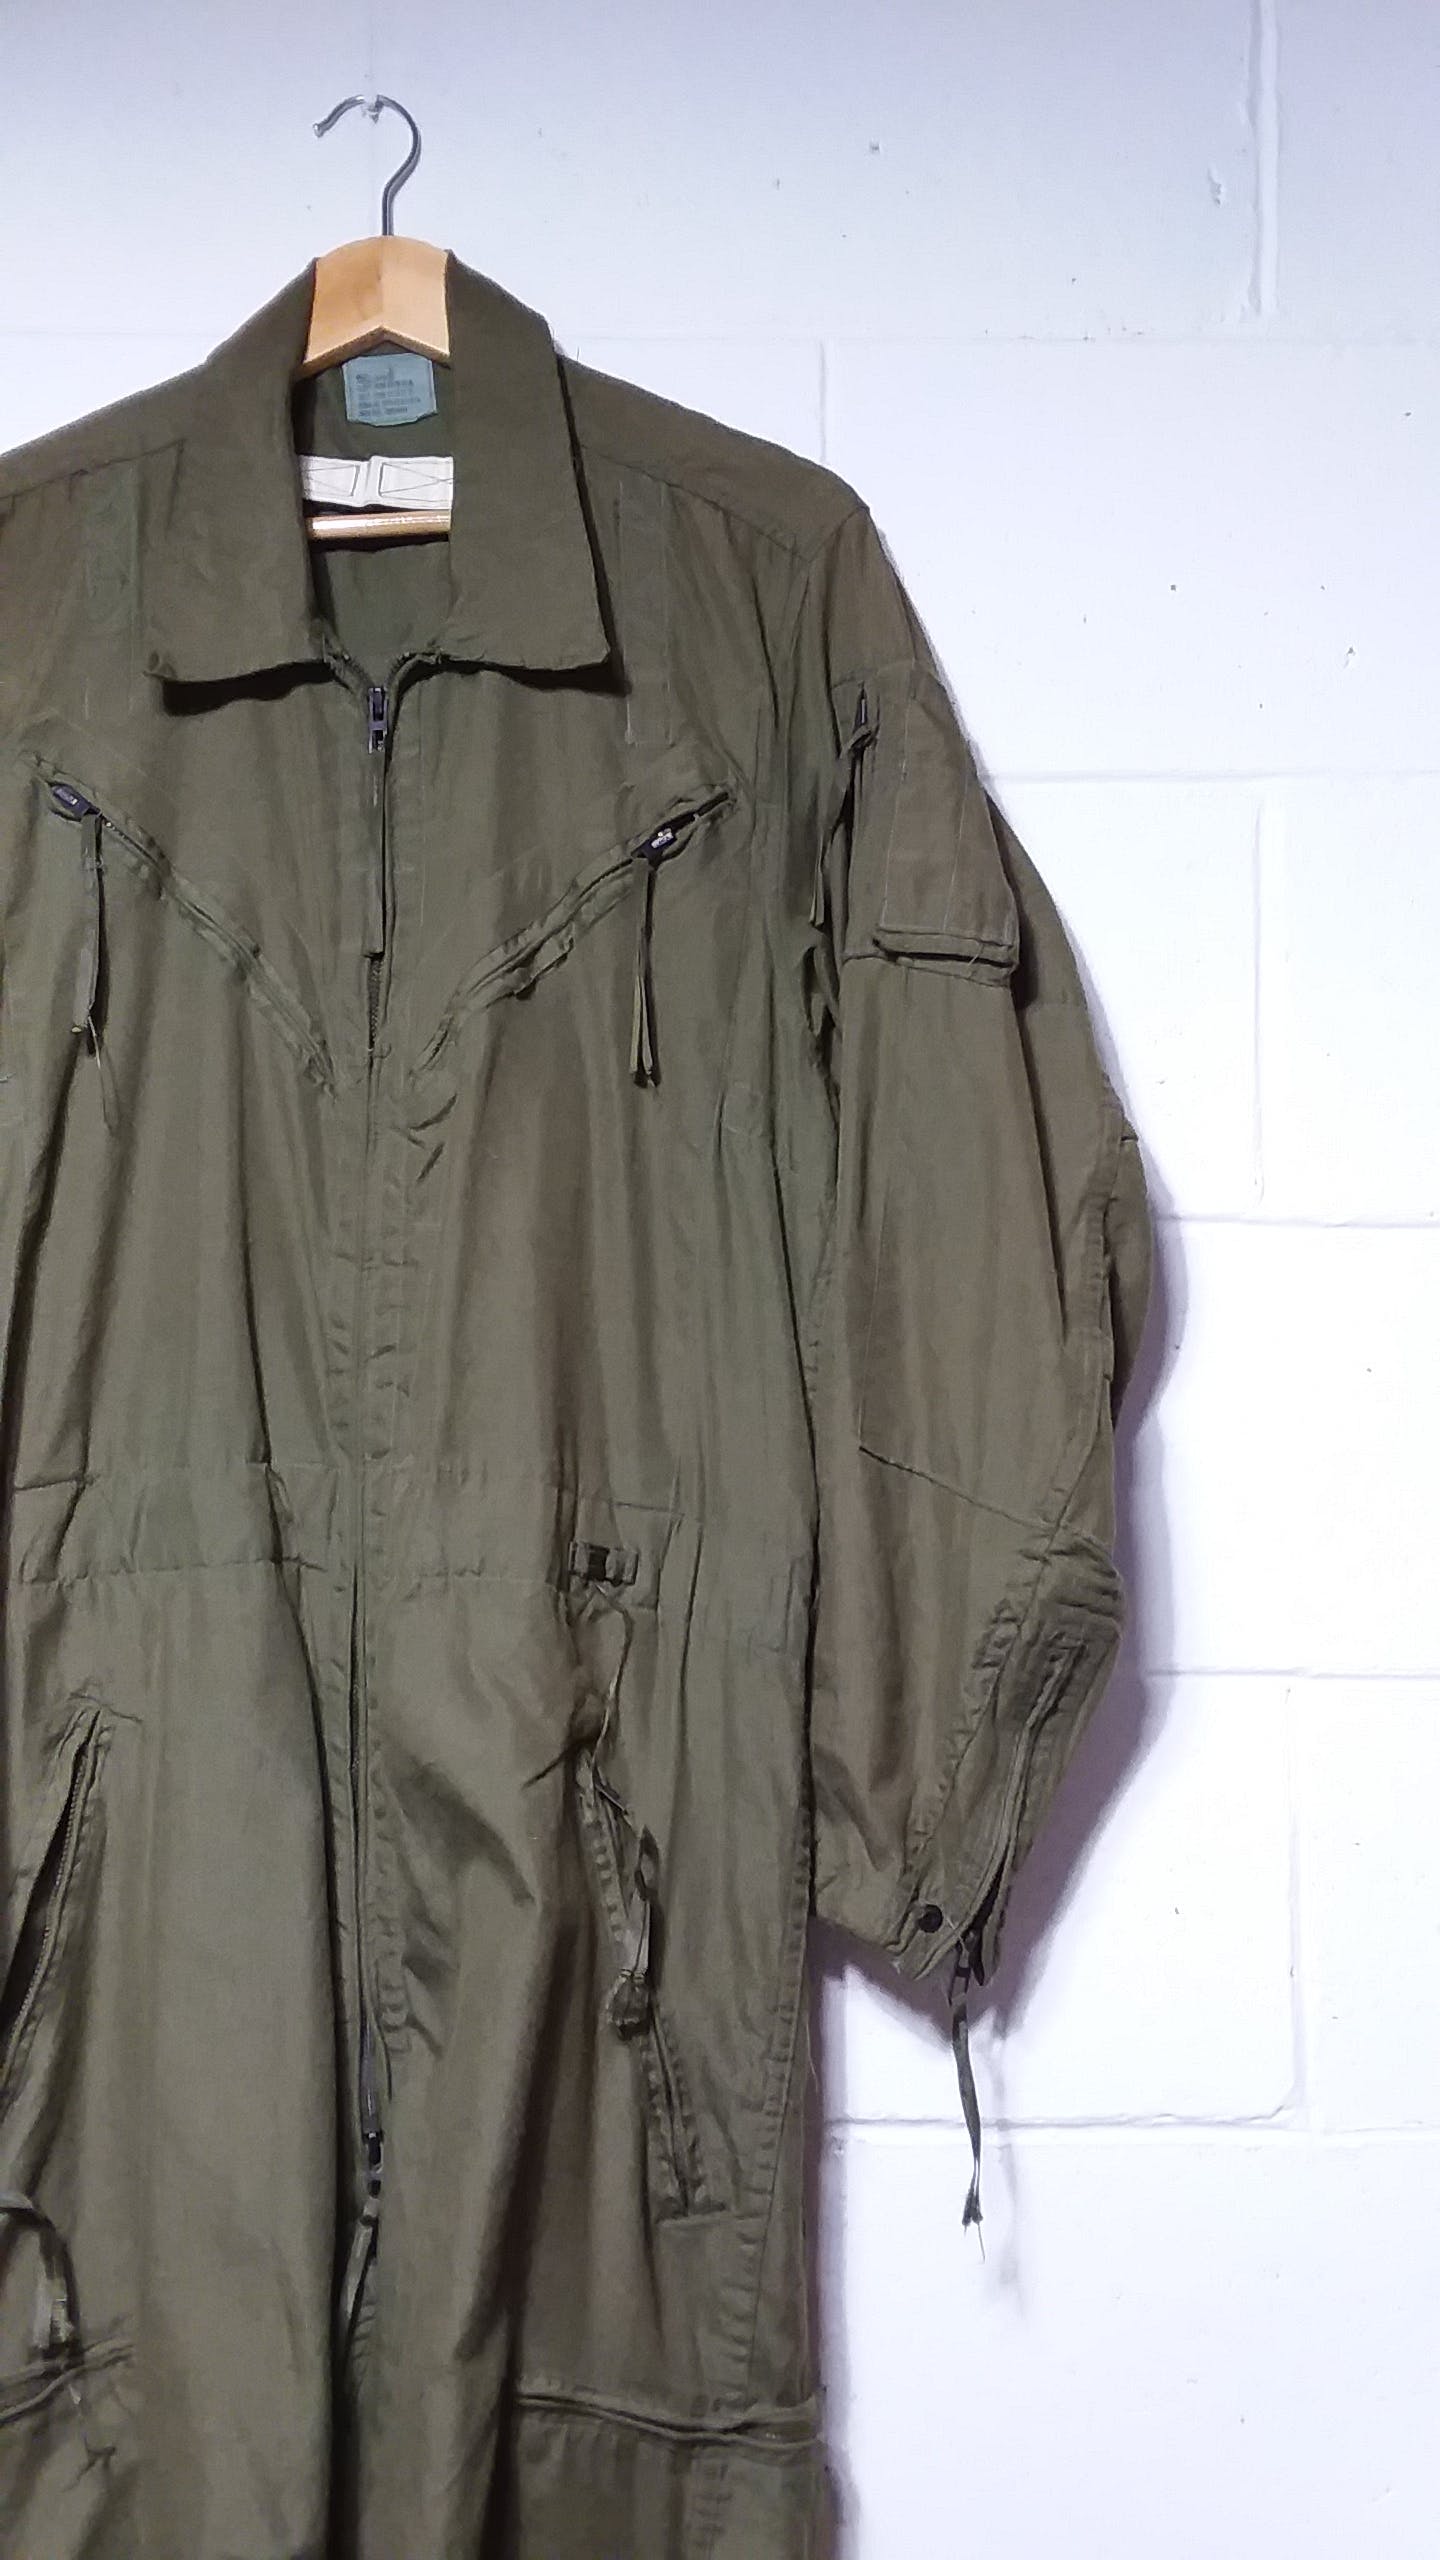 Vintage 70's Military Flight Suit by Military Issue | Shop THRILLING